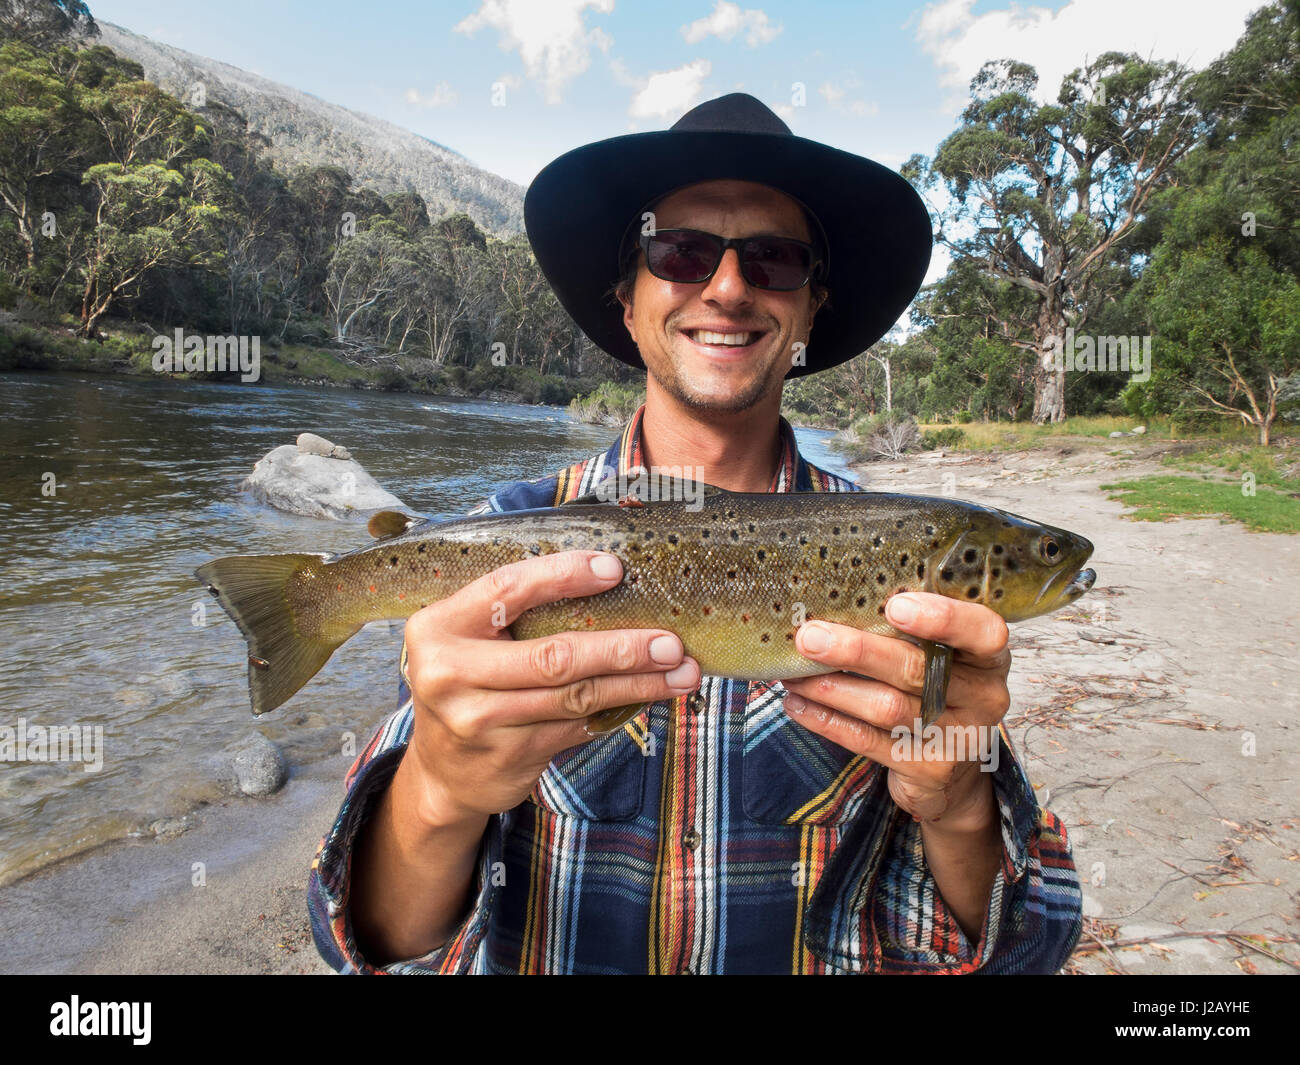 Portrait of happy mature man holding fish by river, Jindabyne, New South Wales, Australia Stock Photo